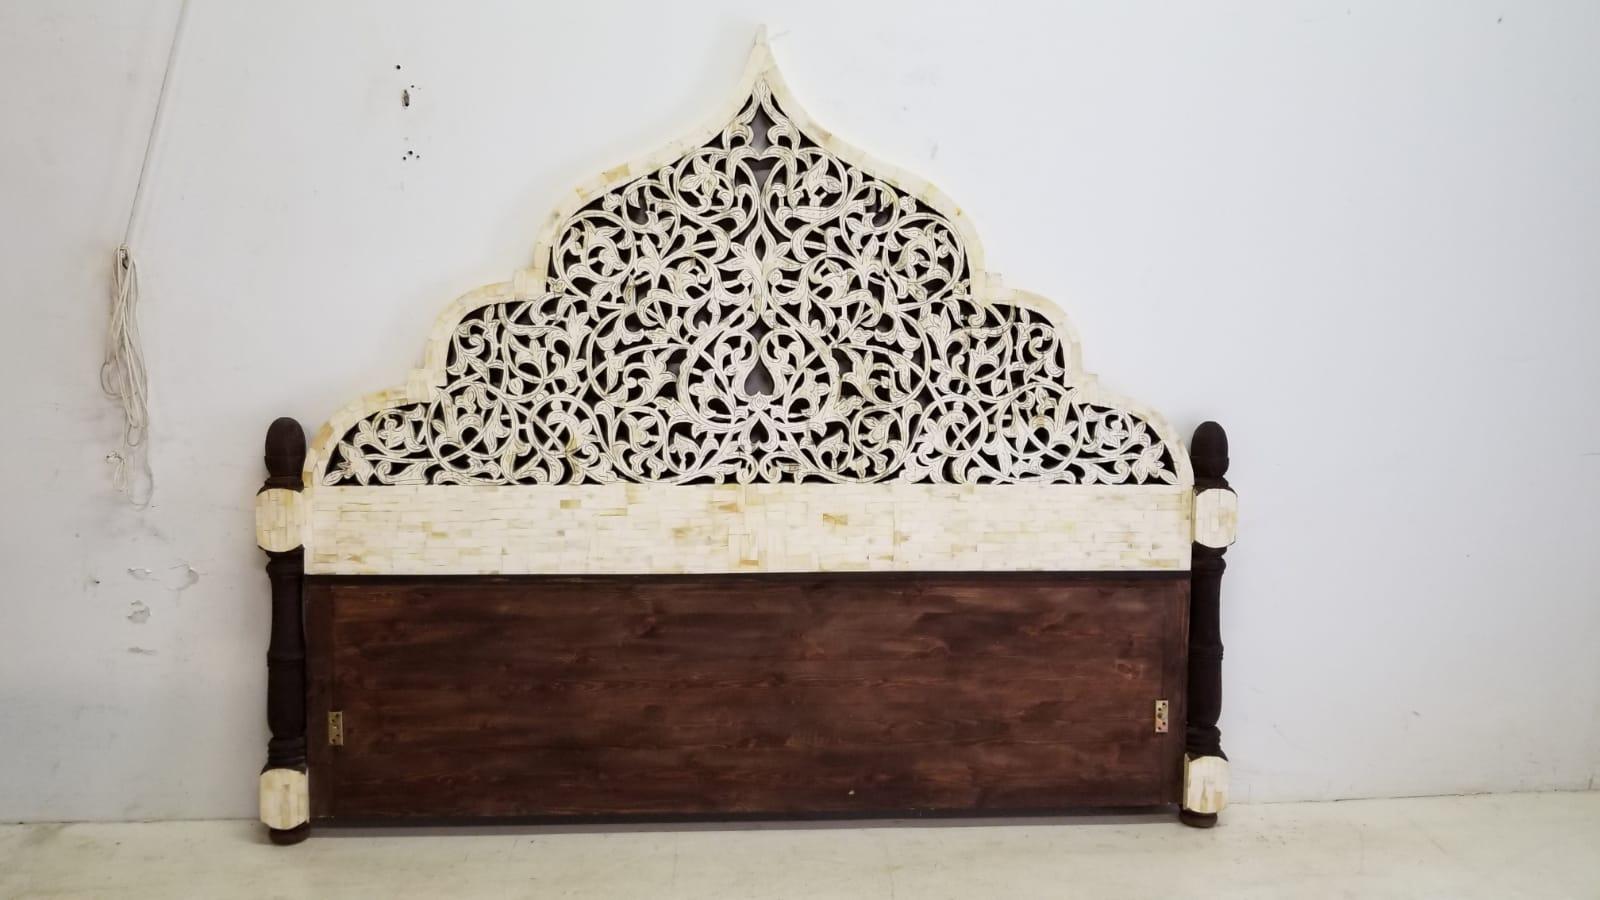 Carved camel bone King-size bed from Morocco and it come with three decorative rails you can attach to the base.
Measures: Foot board 82 1/4 L x 15 T
Rails 78 3/4 L x12 3/4 D.